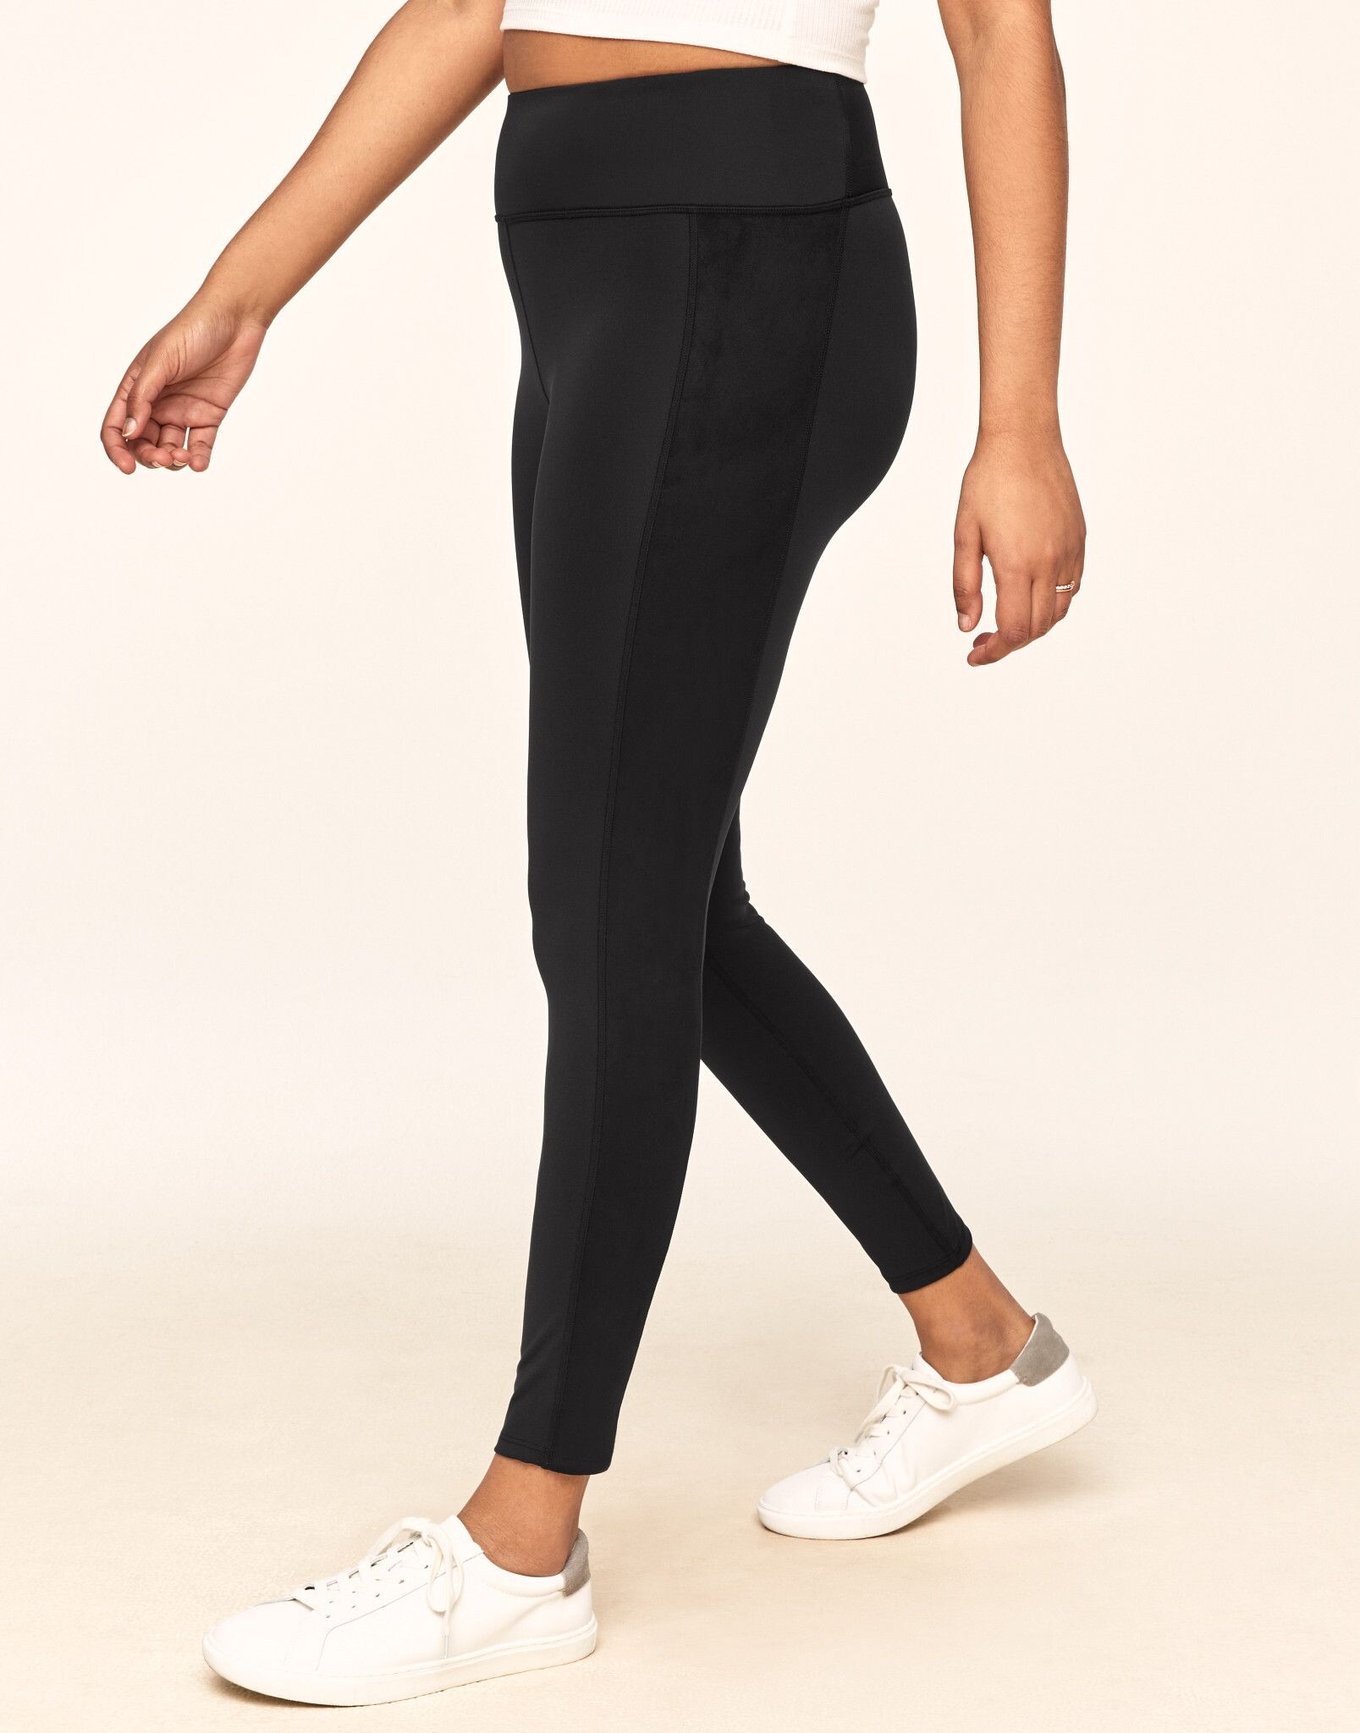 WOMEN'S EXTRA STRETCH HIGH RISE LEGGING PANTS | UNIQLO IN